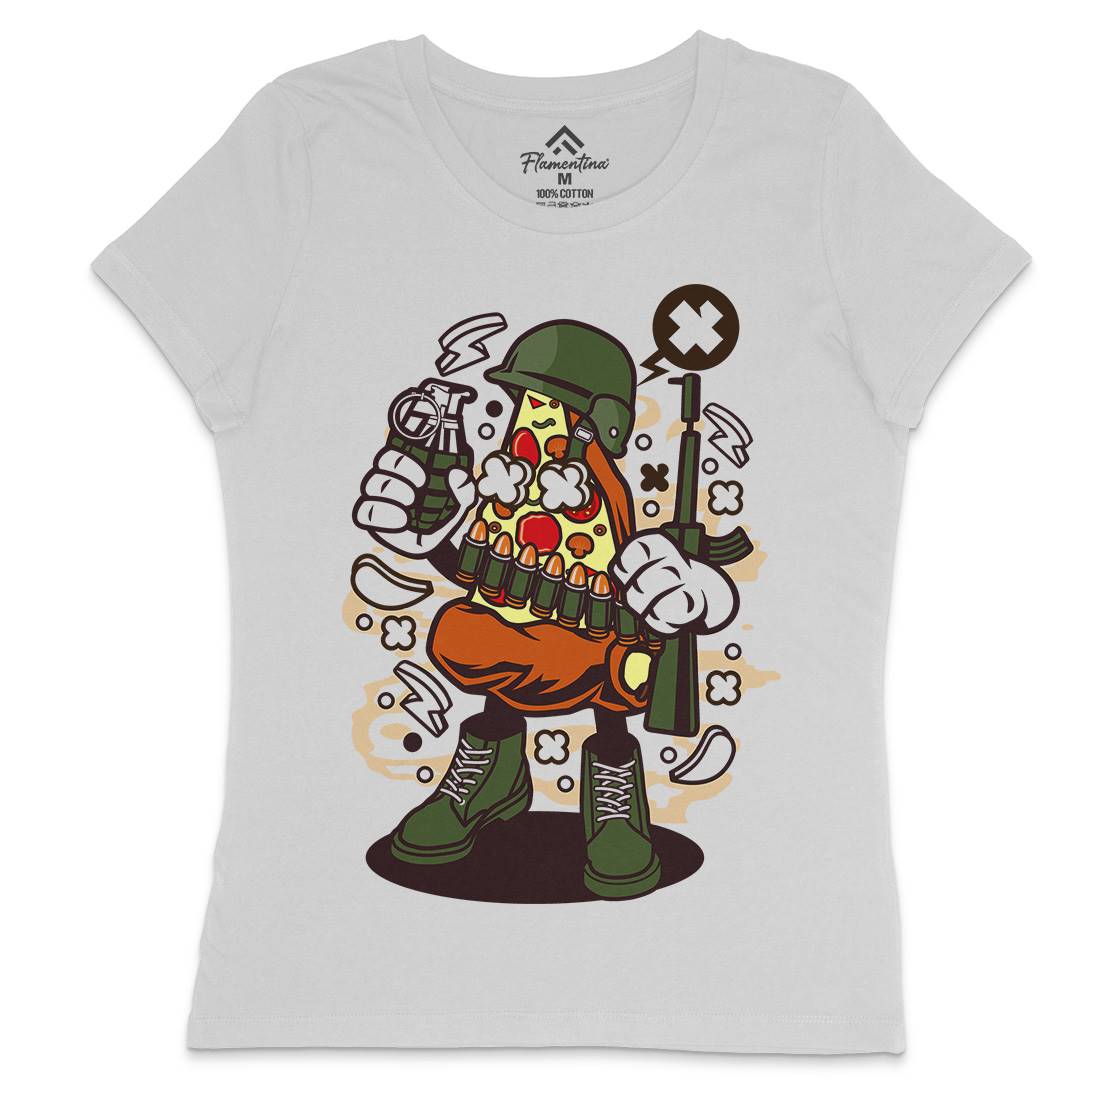 Soldier Pizza Womens Crew Neck T-Shirt Army C254